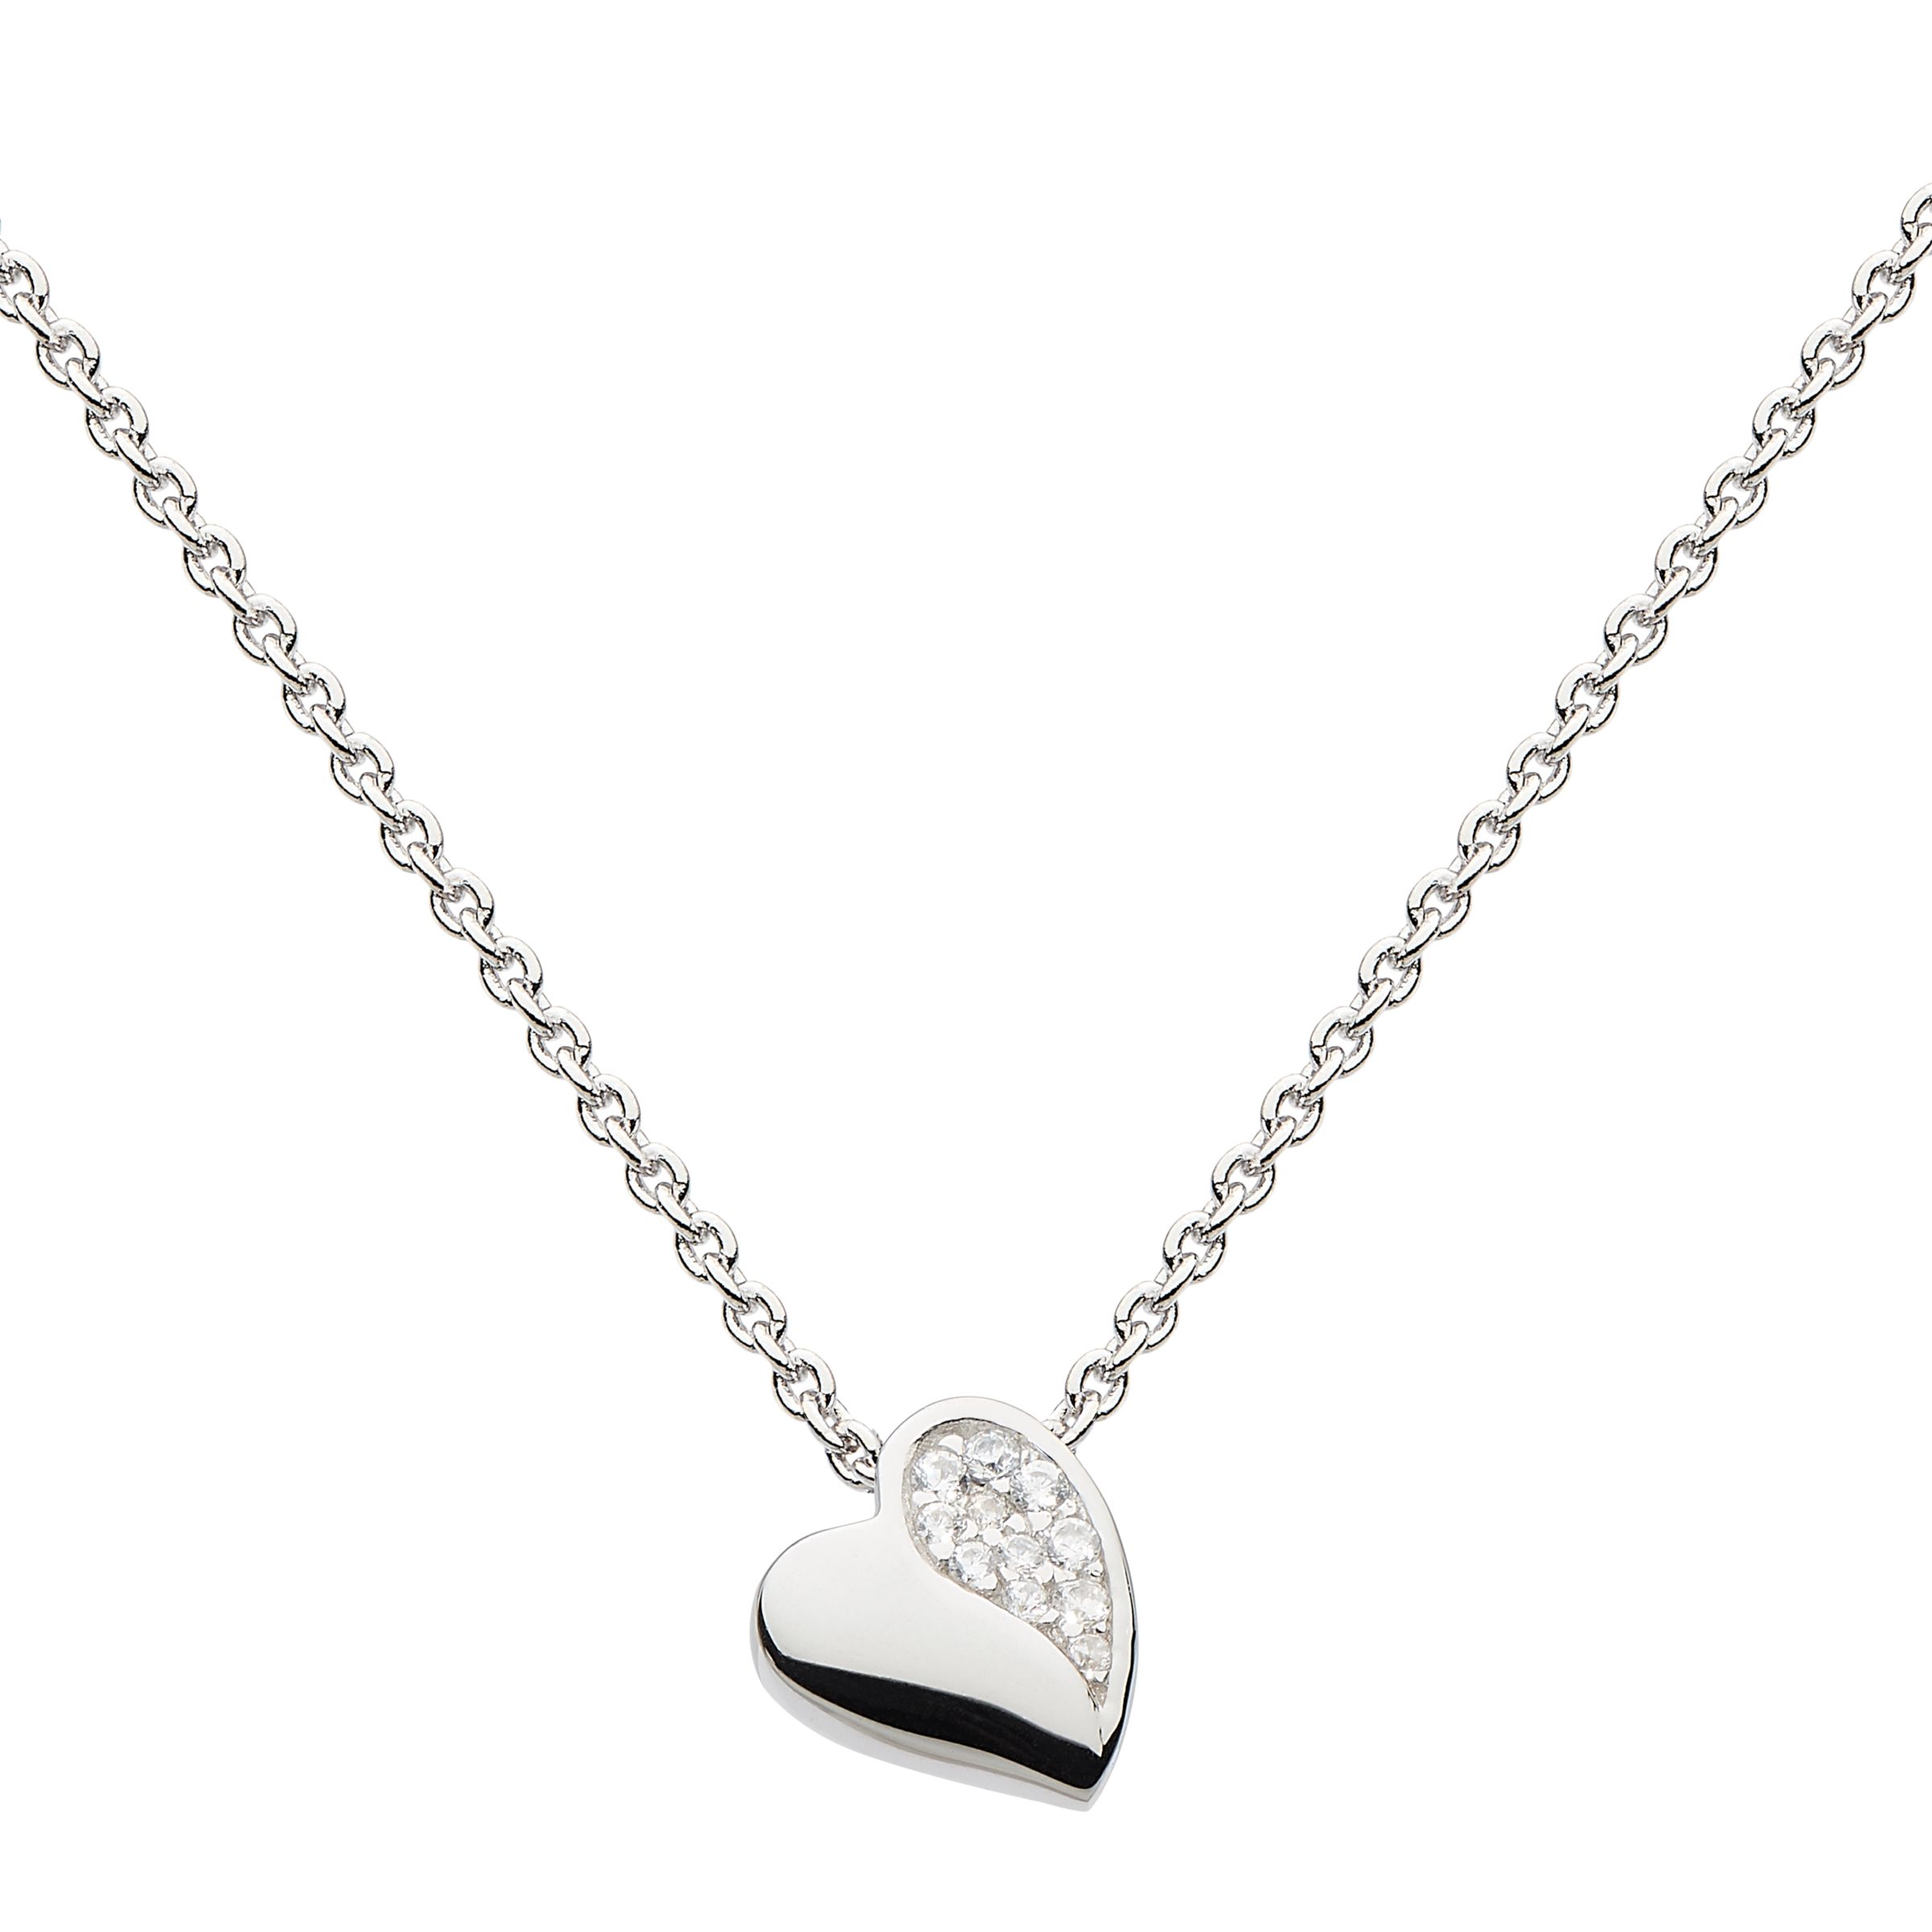 Kit Heath Sterling Silver Pave Heart Pendant Necklace, Silver